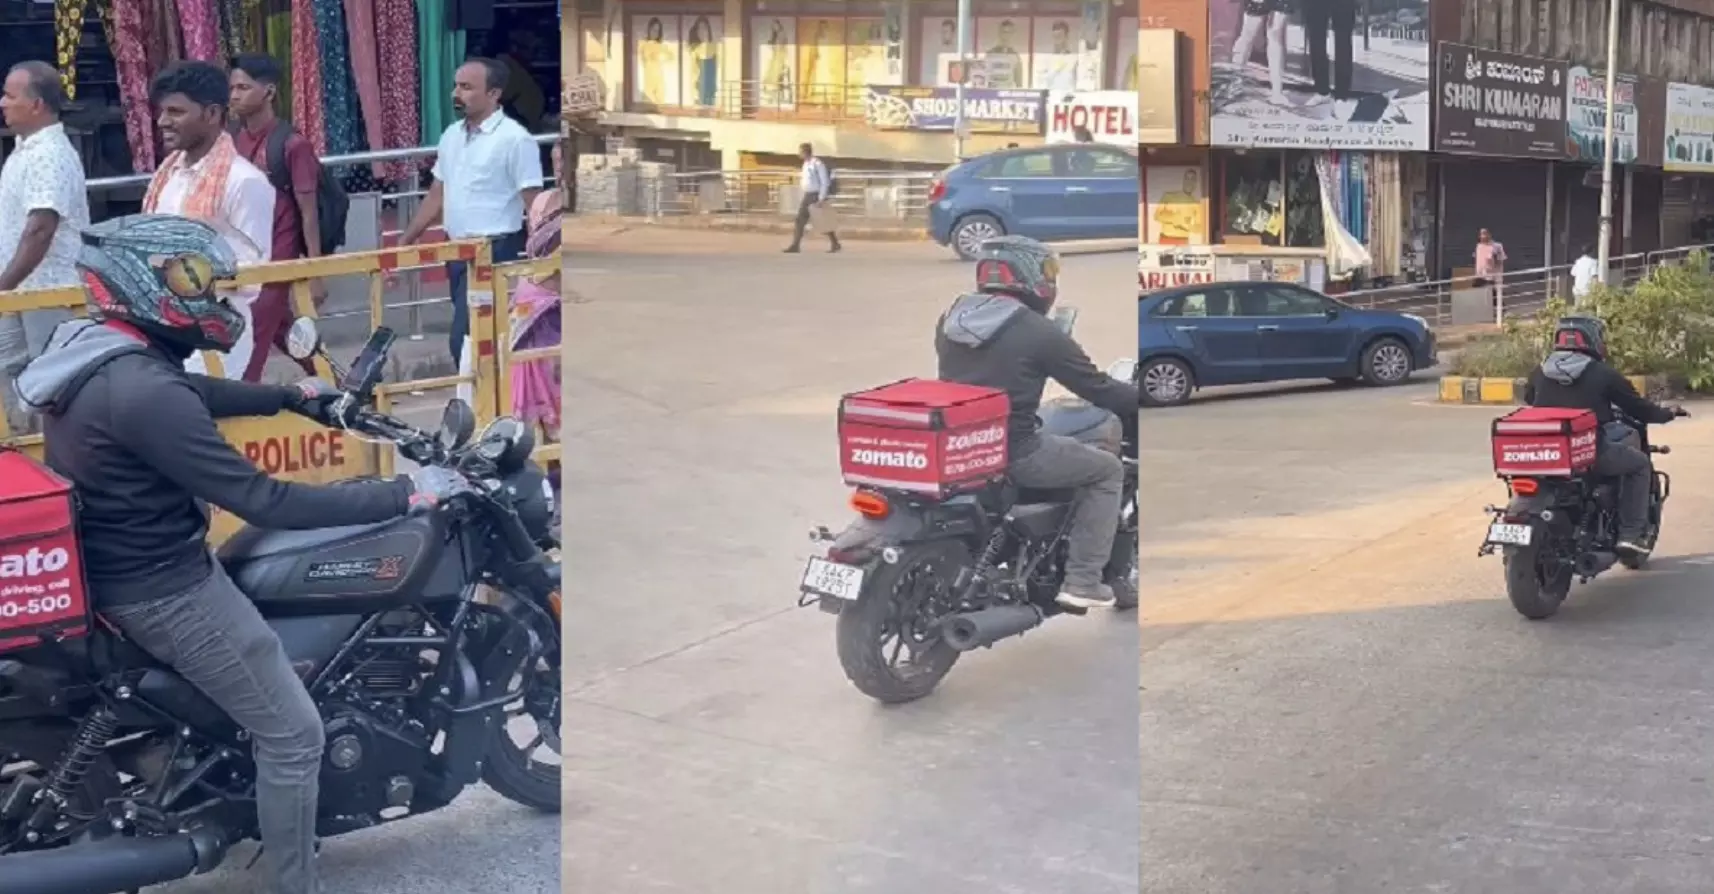 Zomato delivery on Harley Davidson X440; secures 3.4 million views!